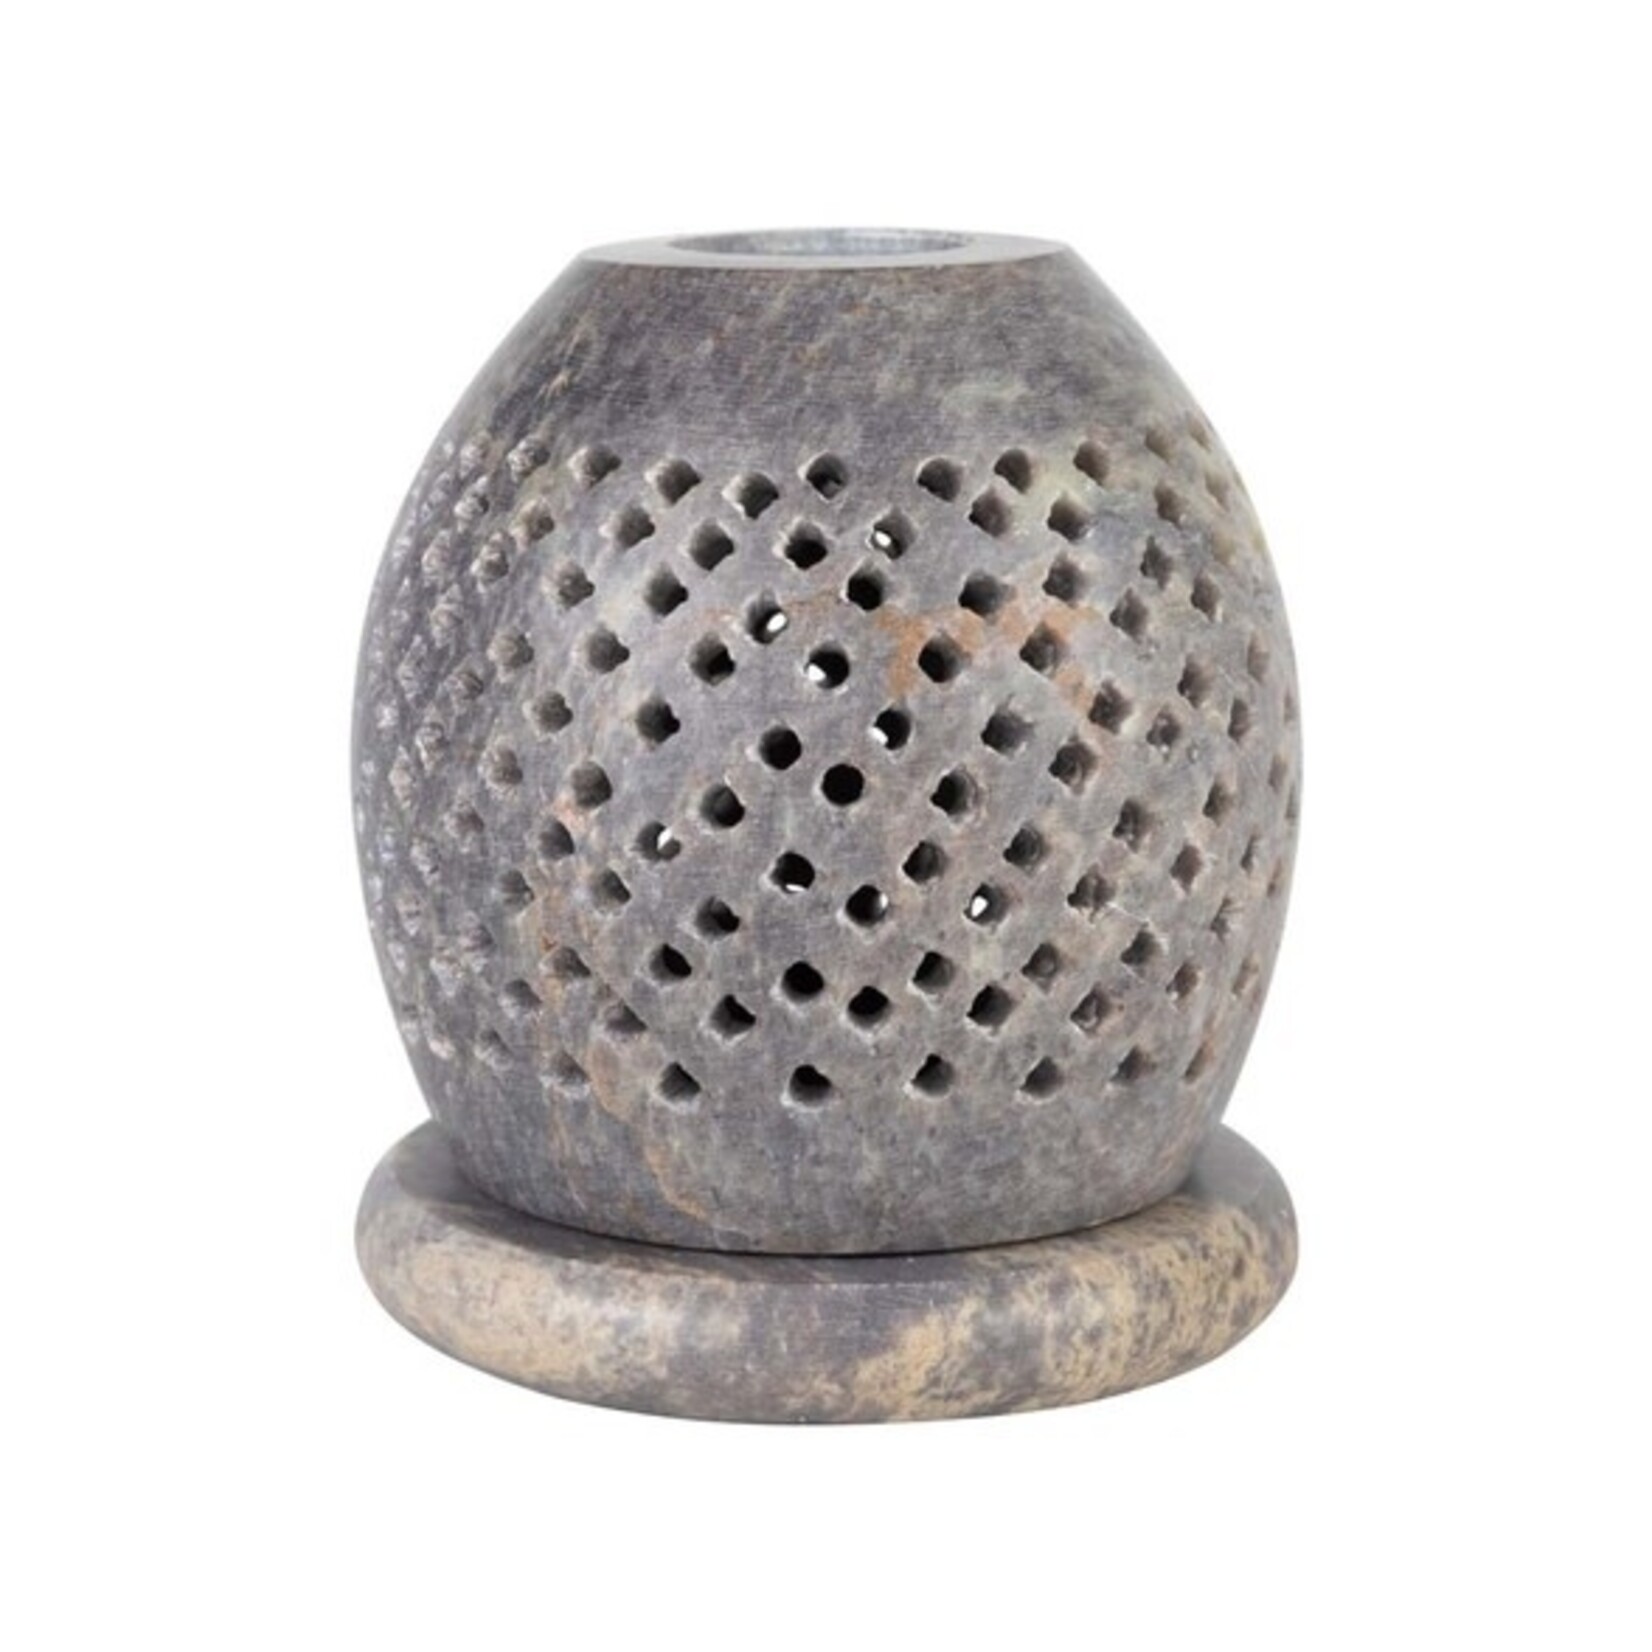 Ten Thousand Villages USA Carved Stone Incense Holder, India